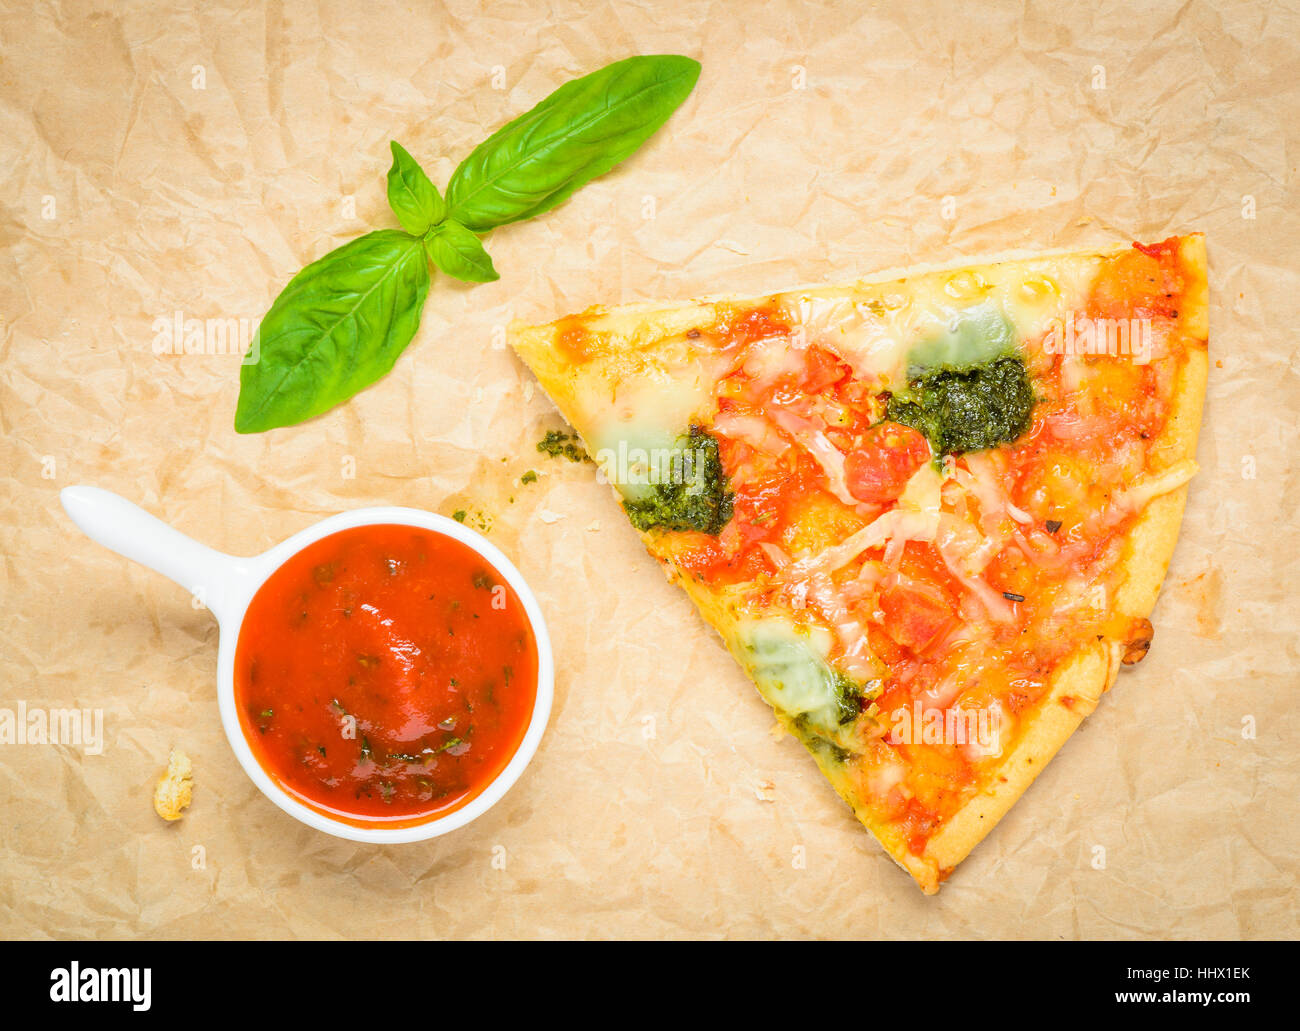 Italian Baked Pizza slice with Tomato Sauce and Fresh green leave of Basil Stock Photo